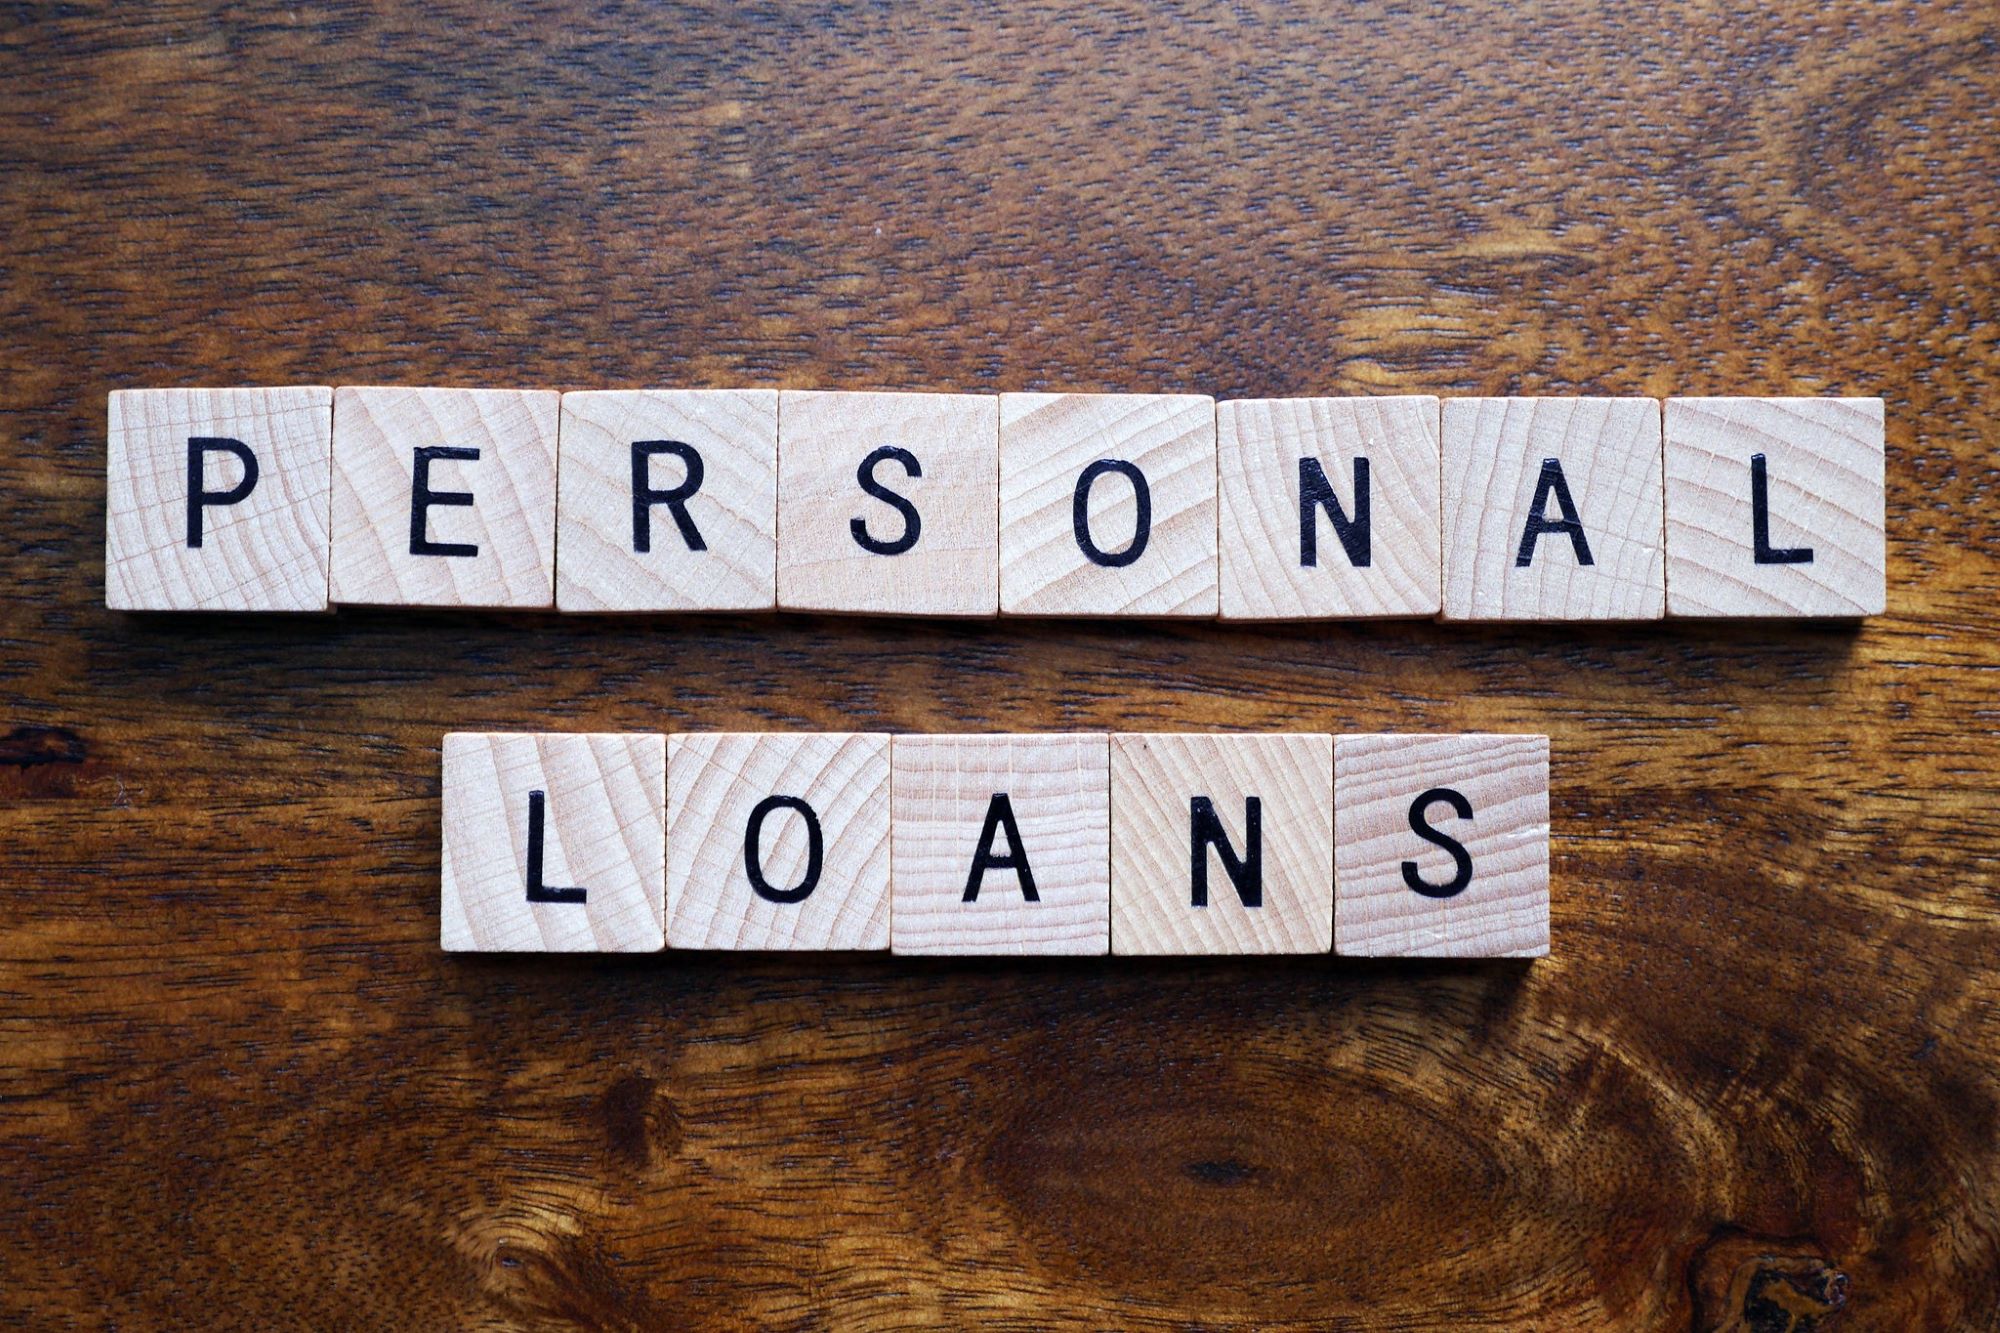 Best Personal Loans With No Credit Check